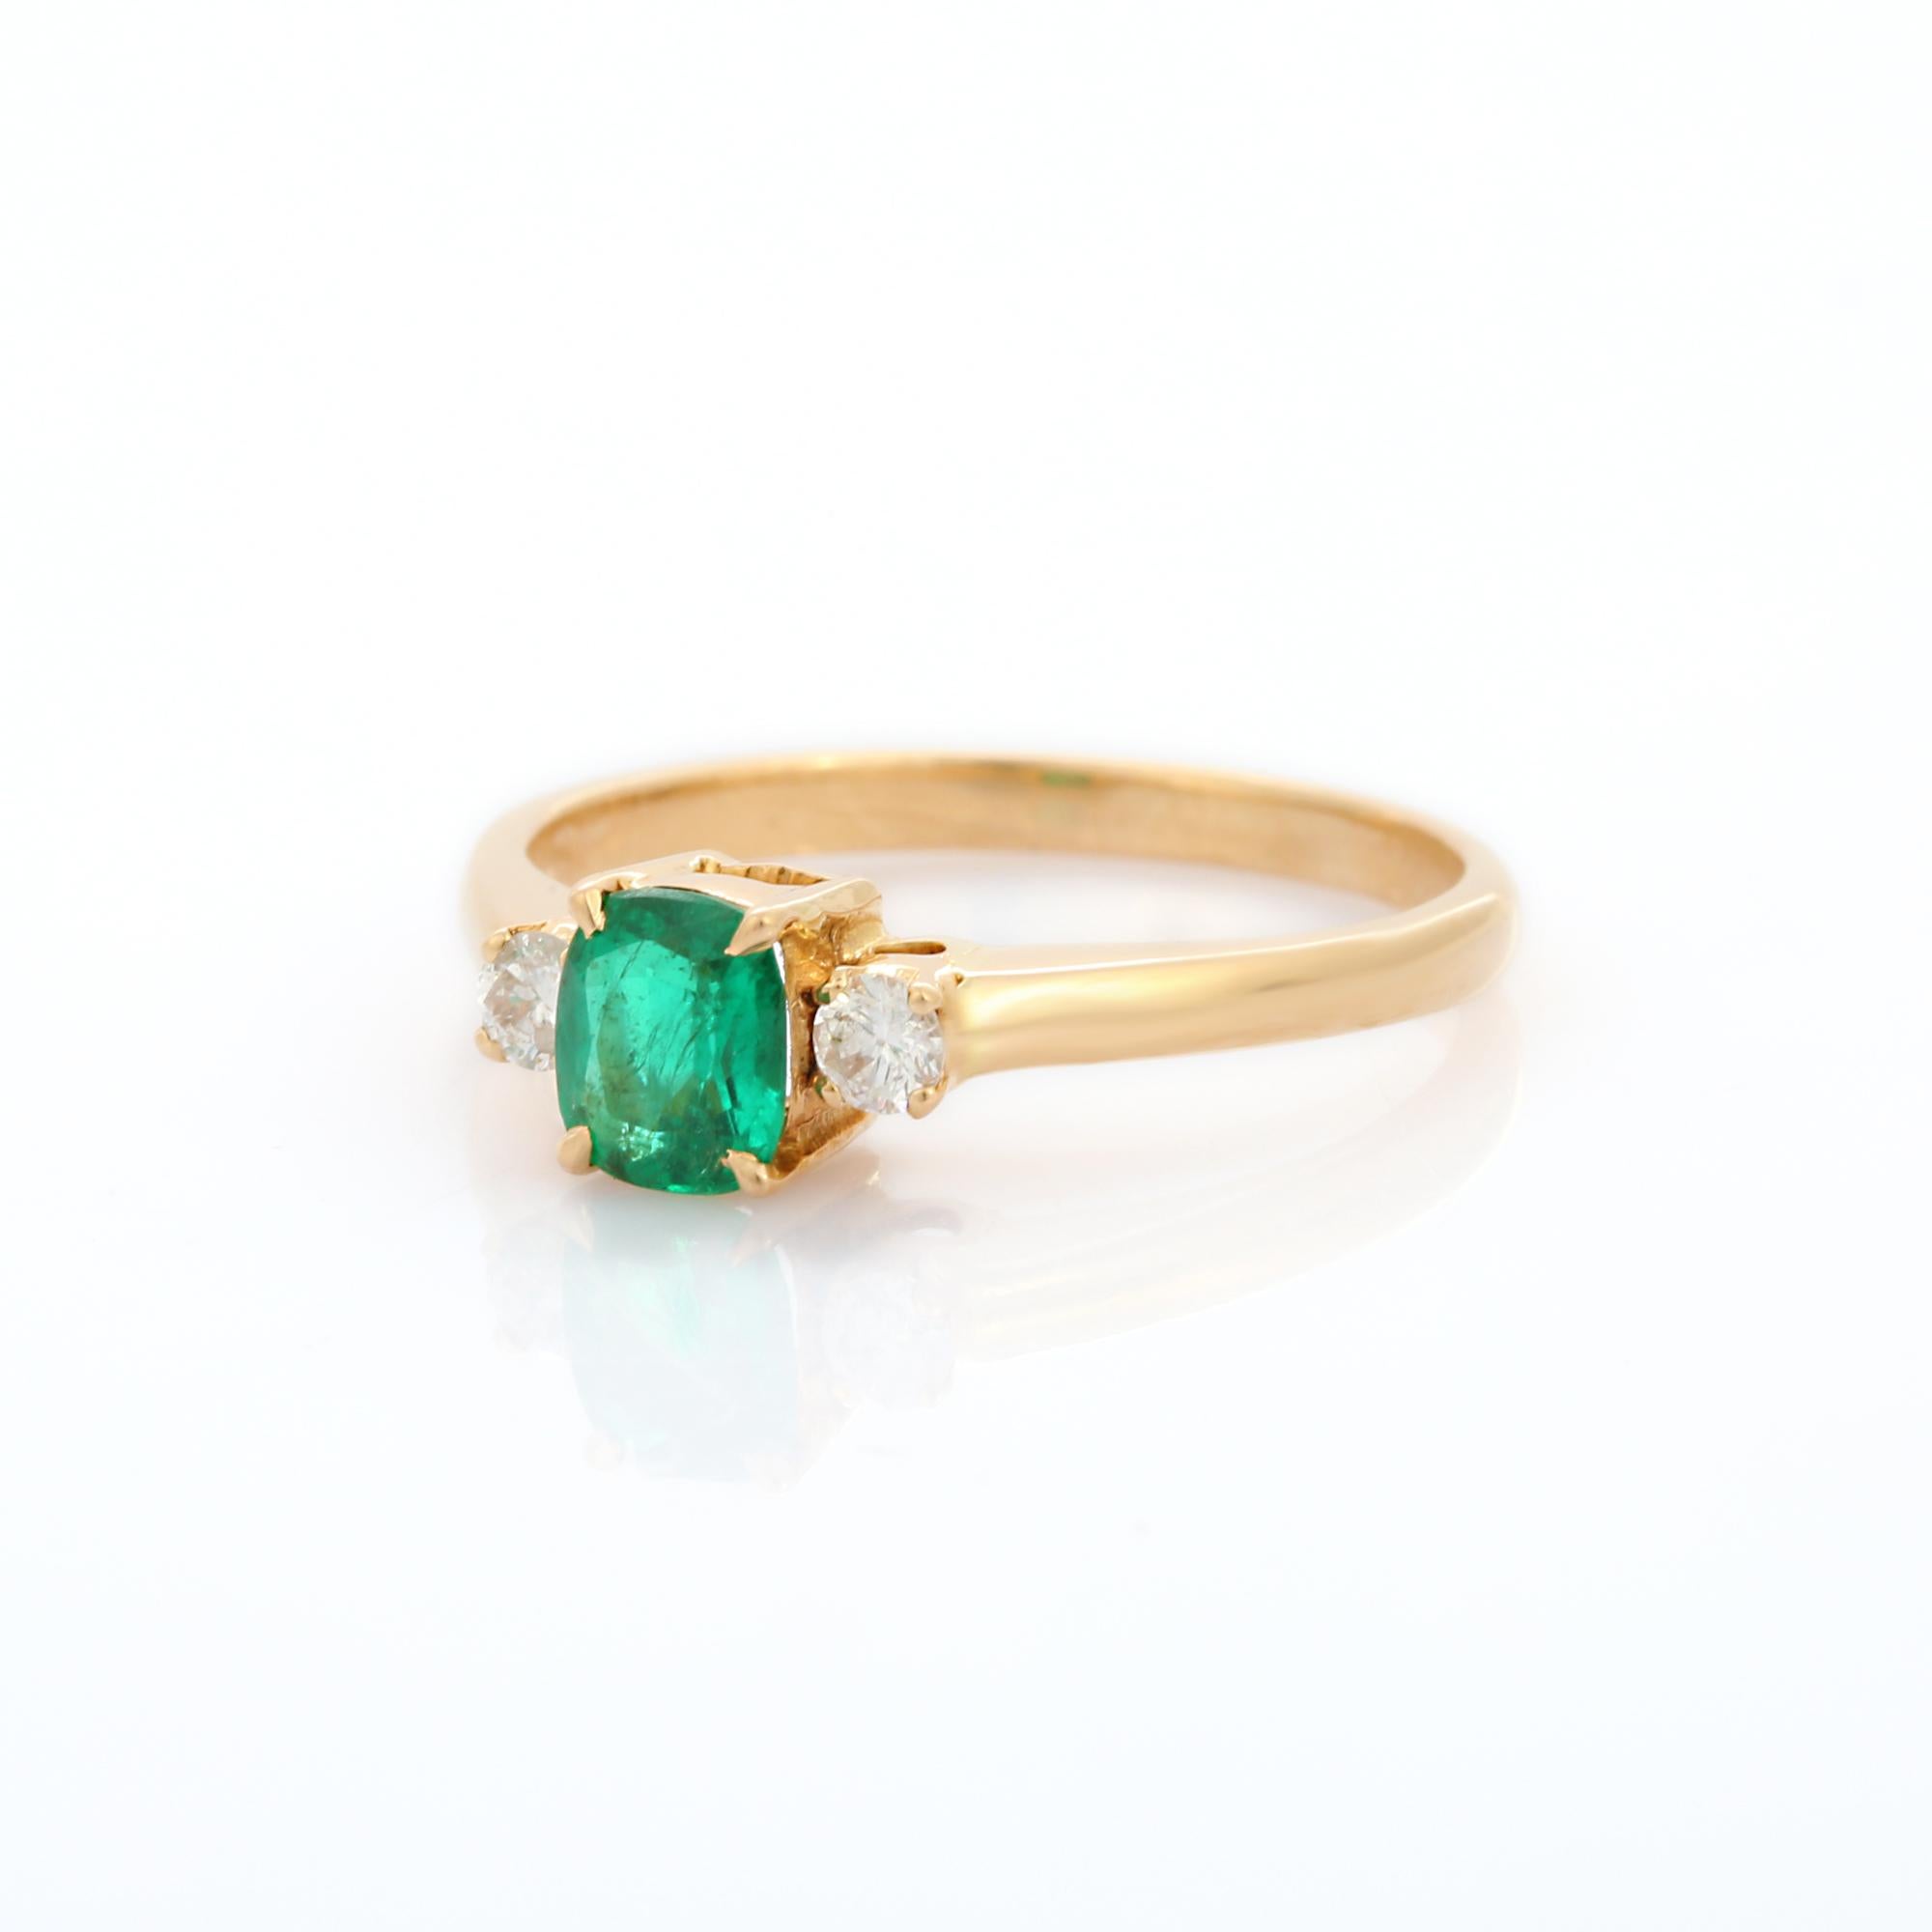 For Sale:  Emerald Gemstone Ring in 18k Solid Yellow Gold with Diamonds 3